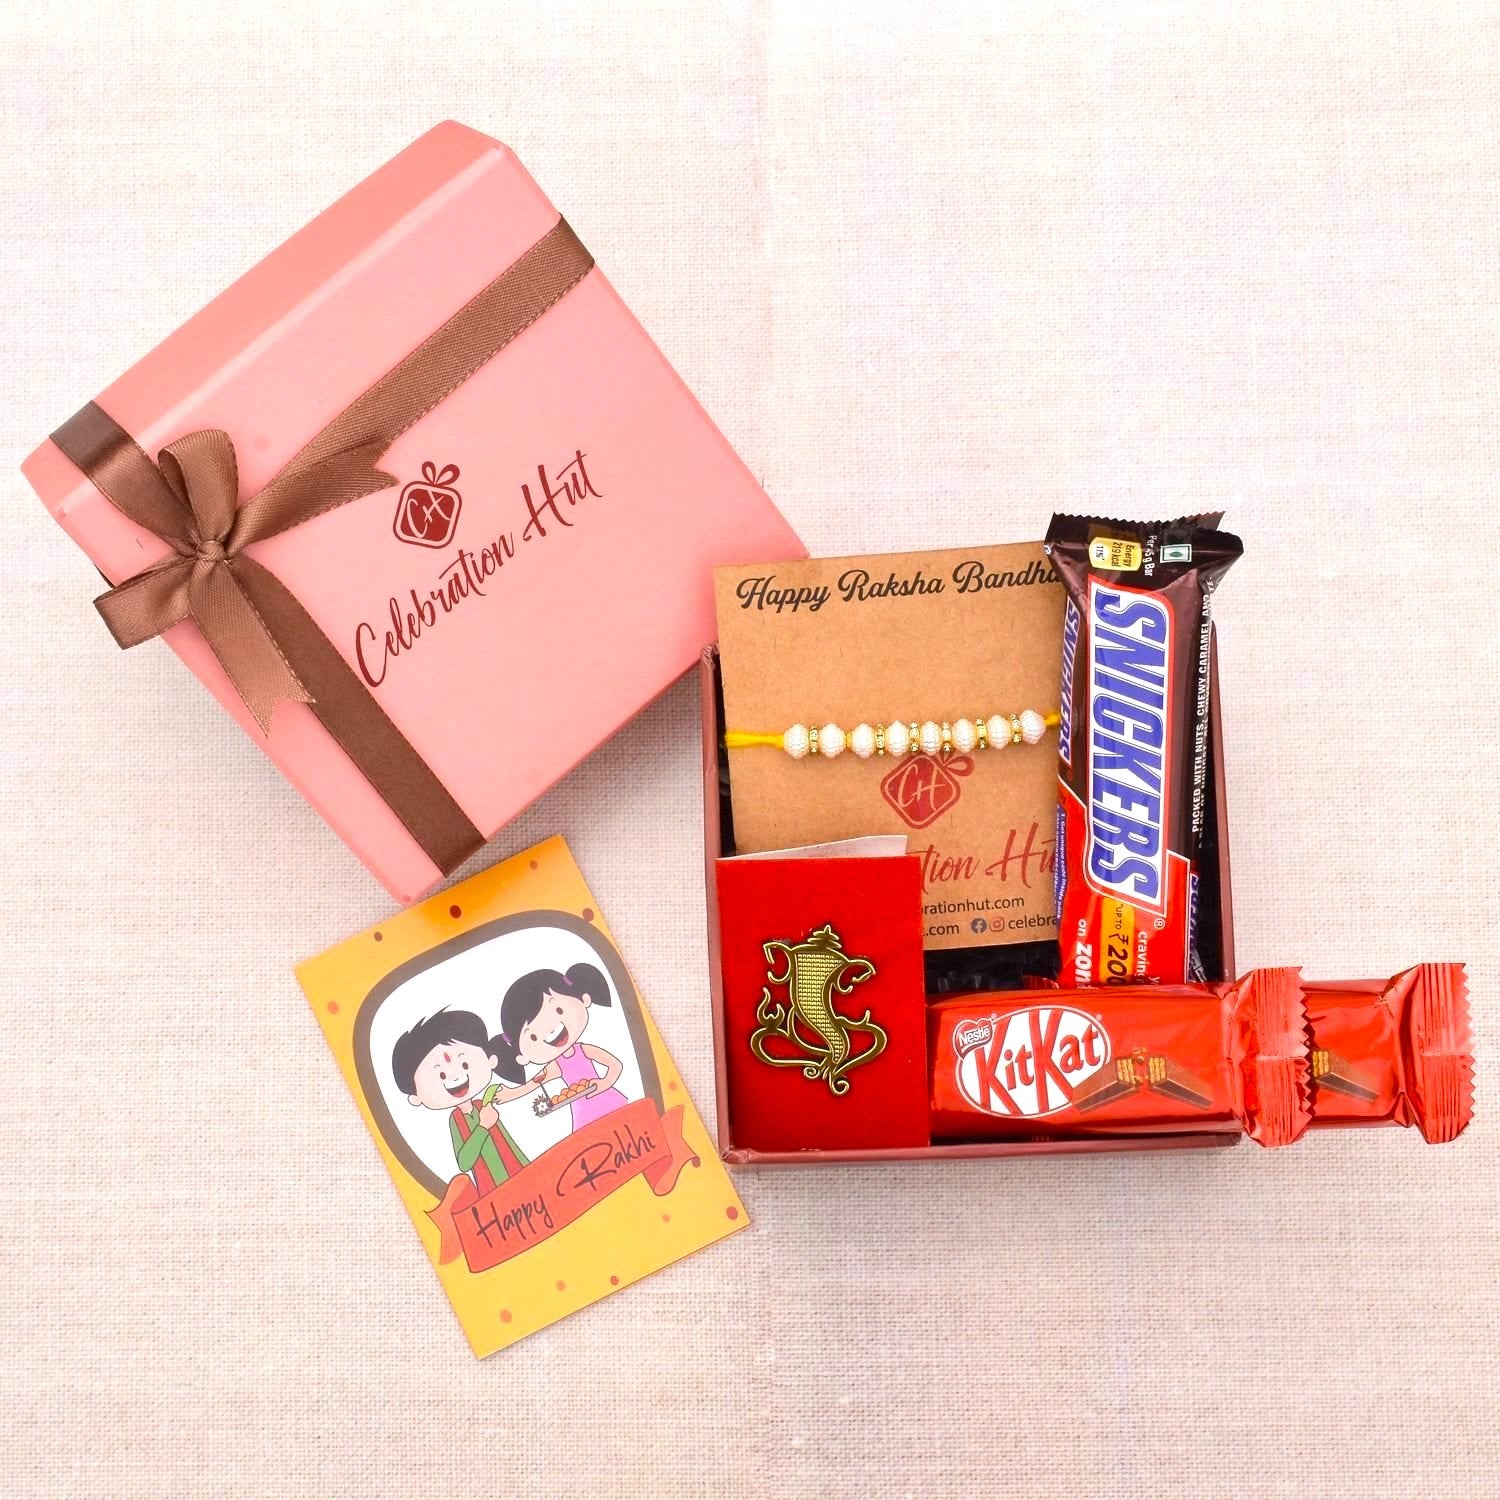 Pearl Rakhi Hamper For Brother With Kit Kat And Snickers